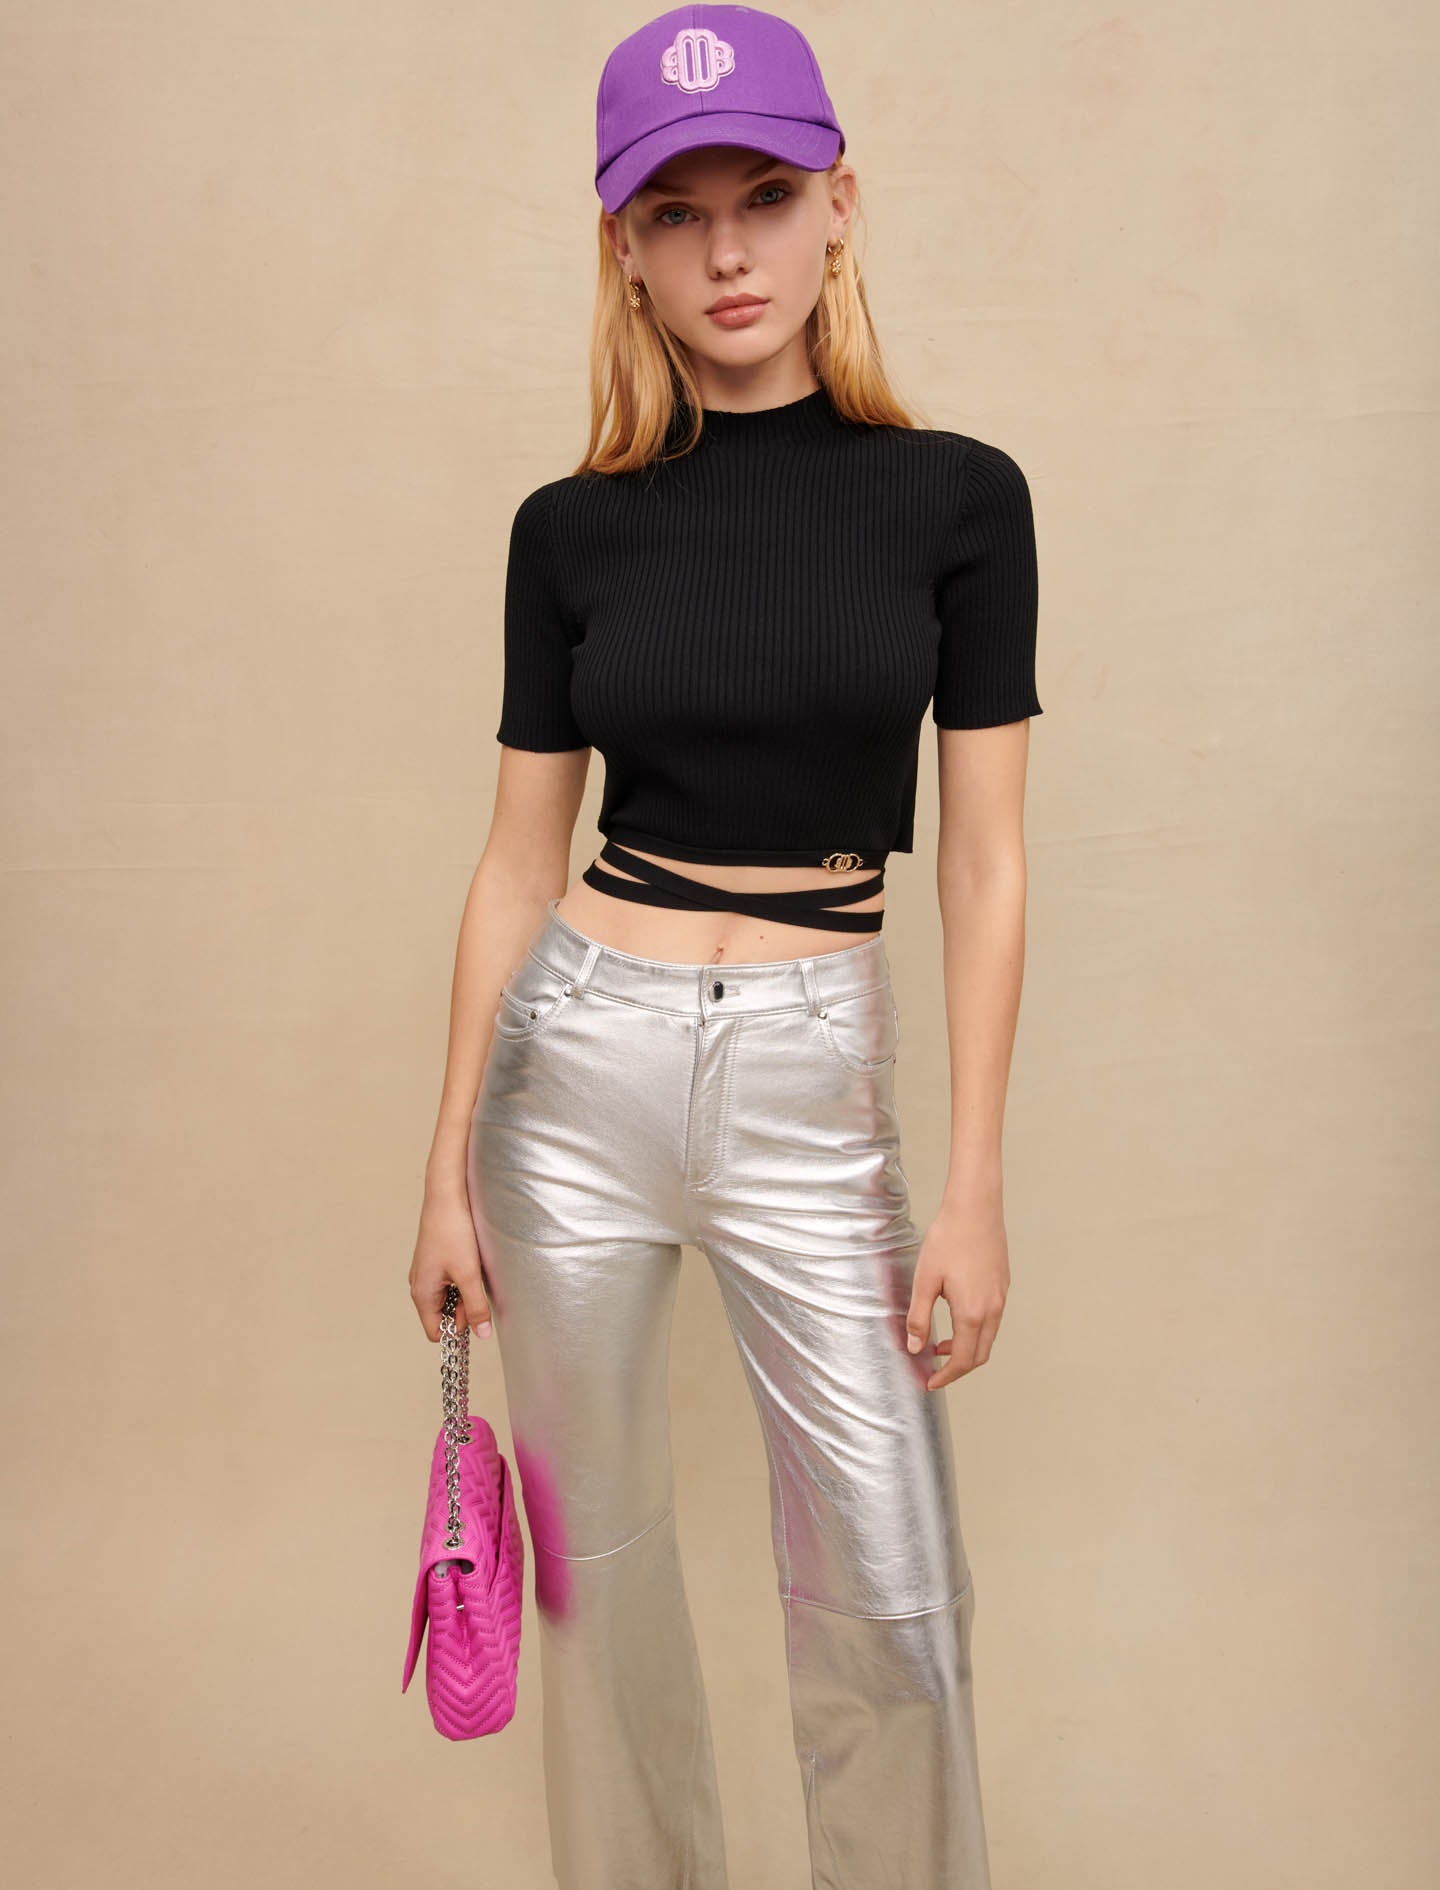 Black-featured-criss-cross cropped top